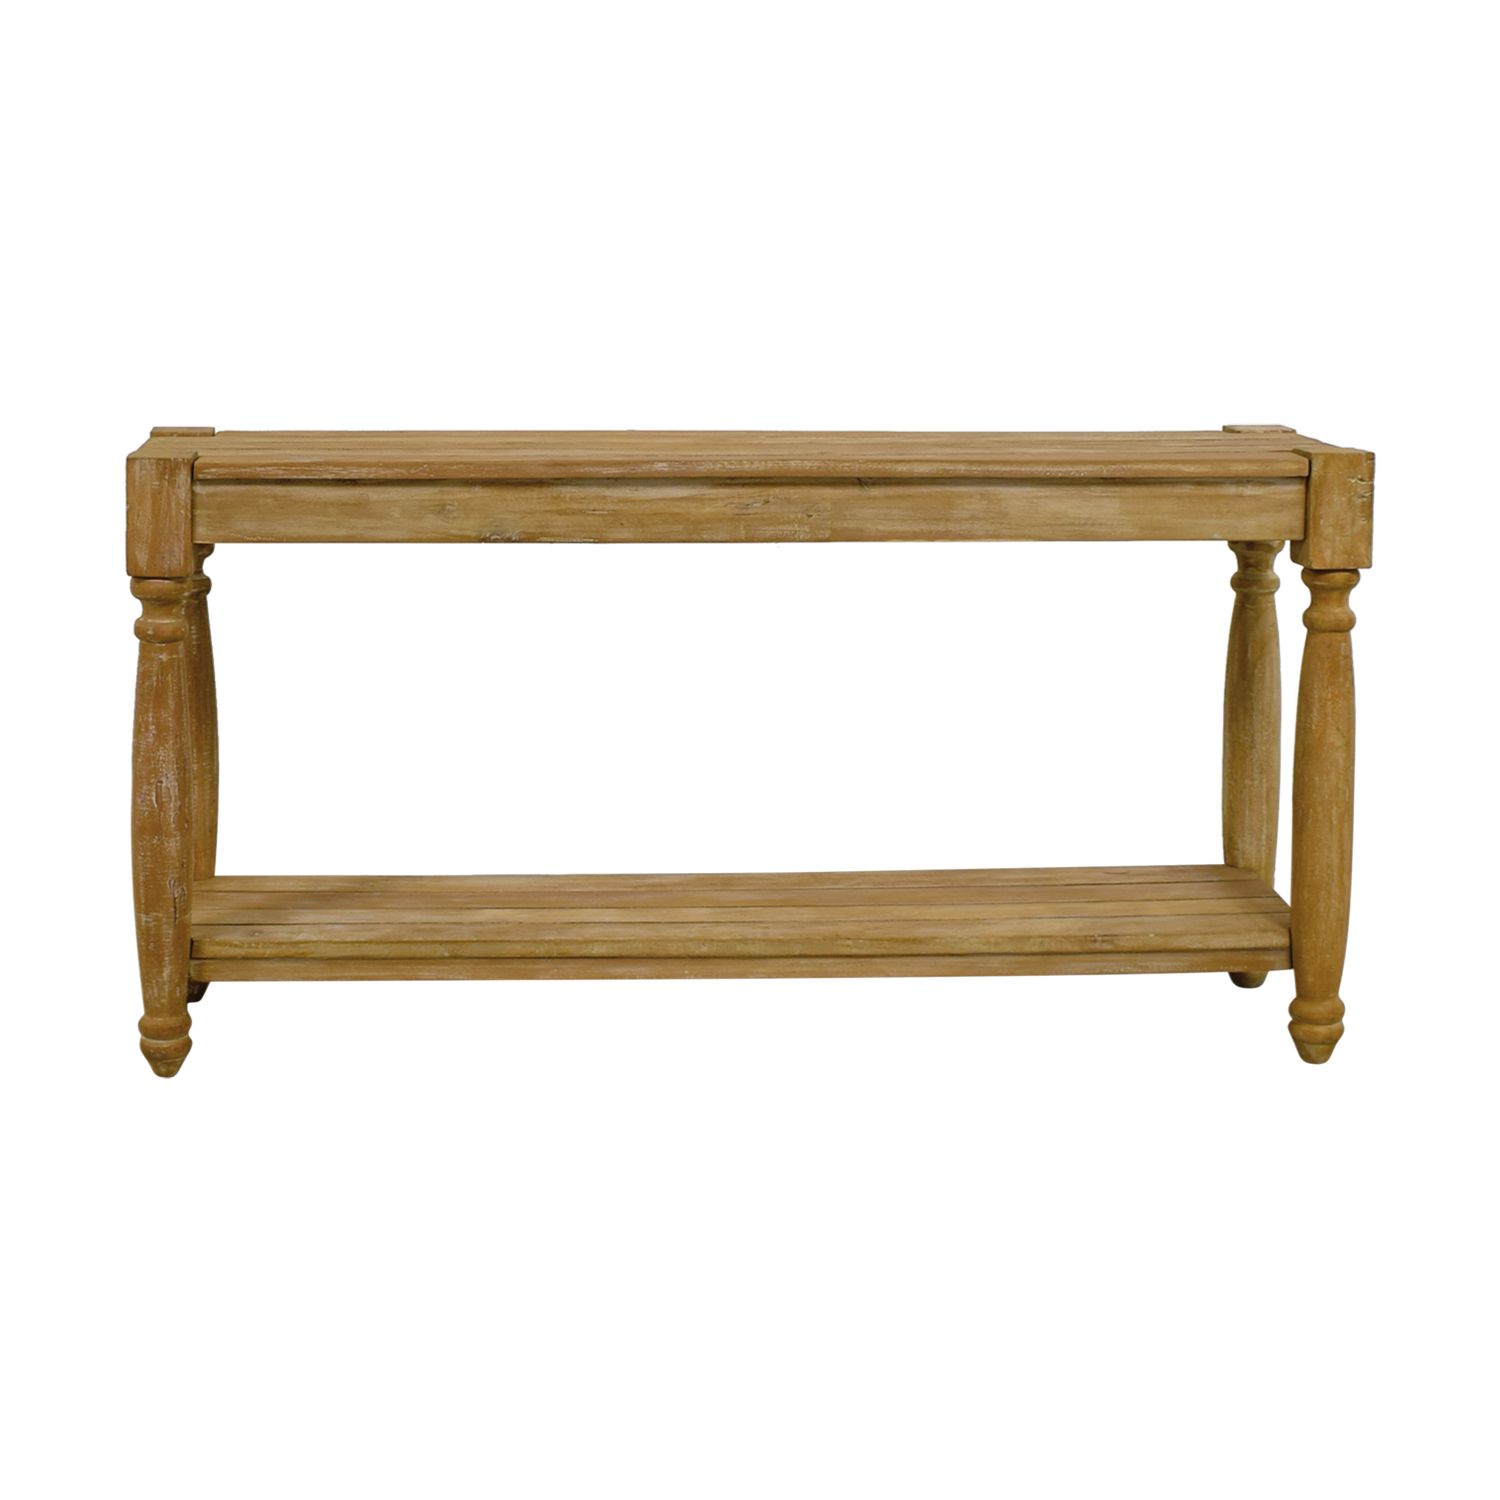 77% Off – Homegoods Homegoods Natural Wood Console Table / Tables Regarding Natural Wood Console Tables (View 20 of 20)